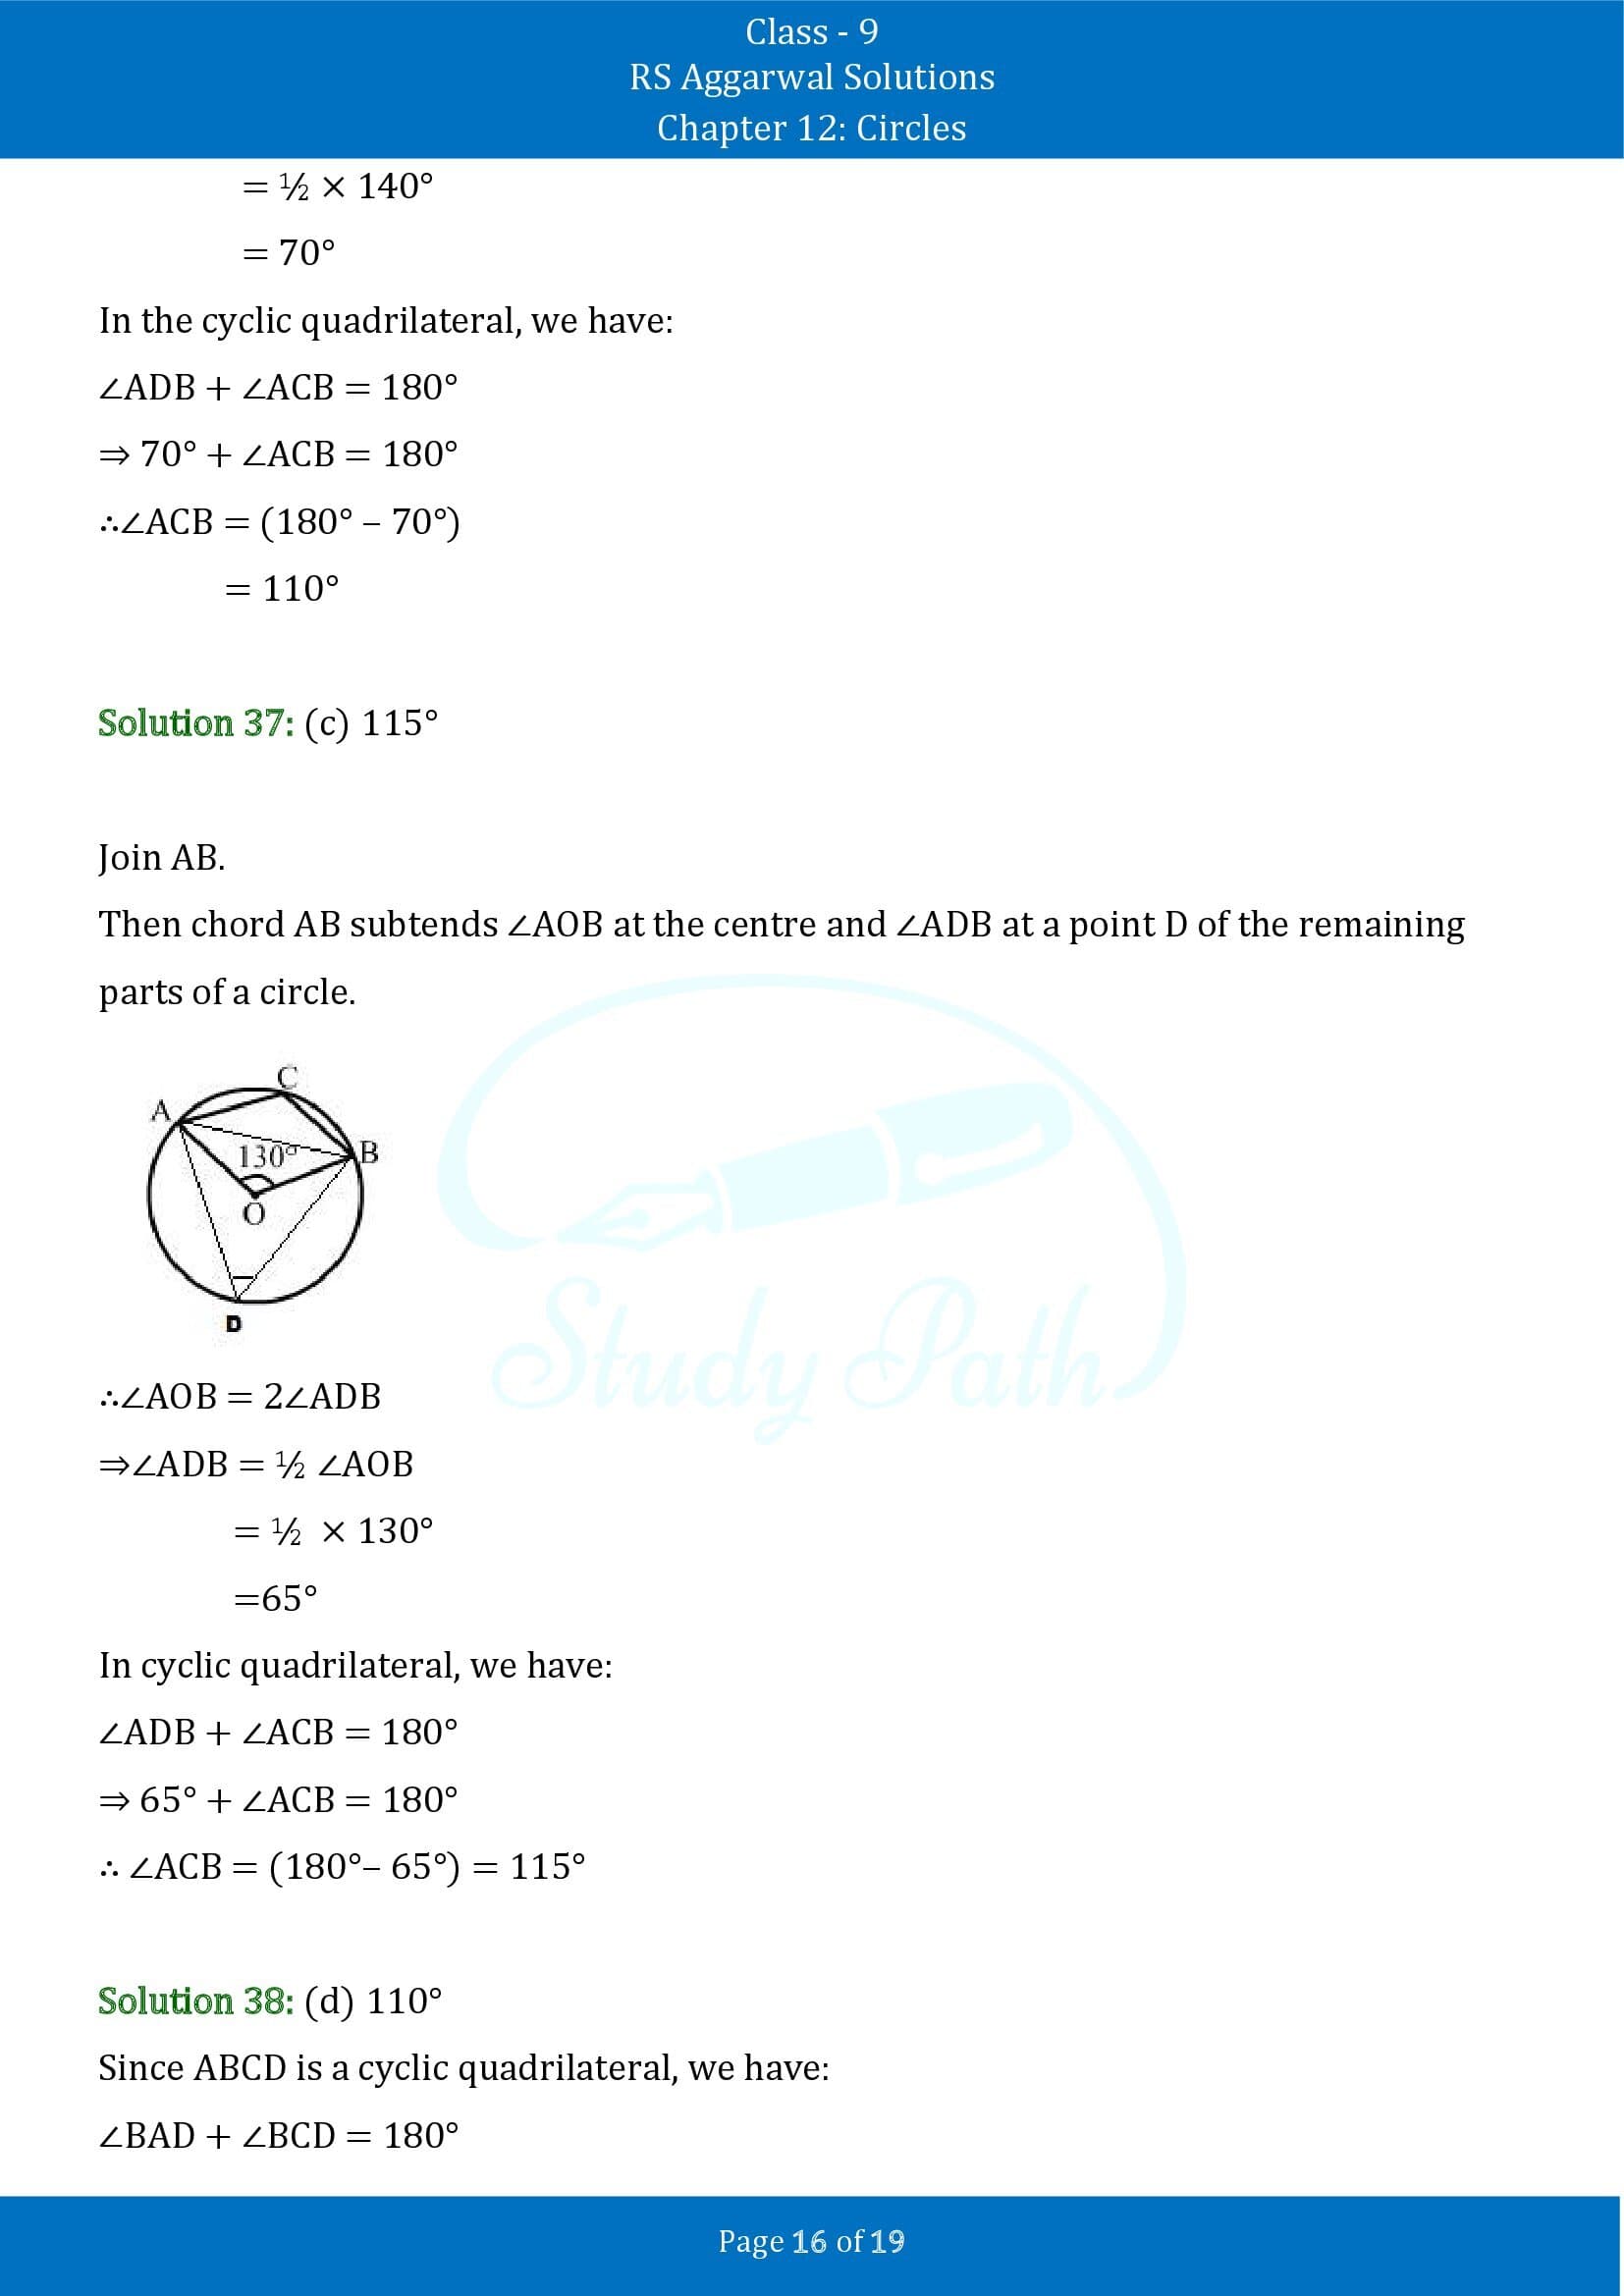 RS Aggarwal Solutions Class 9 Chapter 12 Circles Multiple Choice Questions MCQs 00016